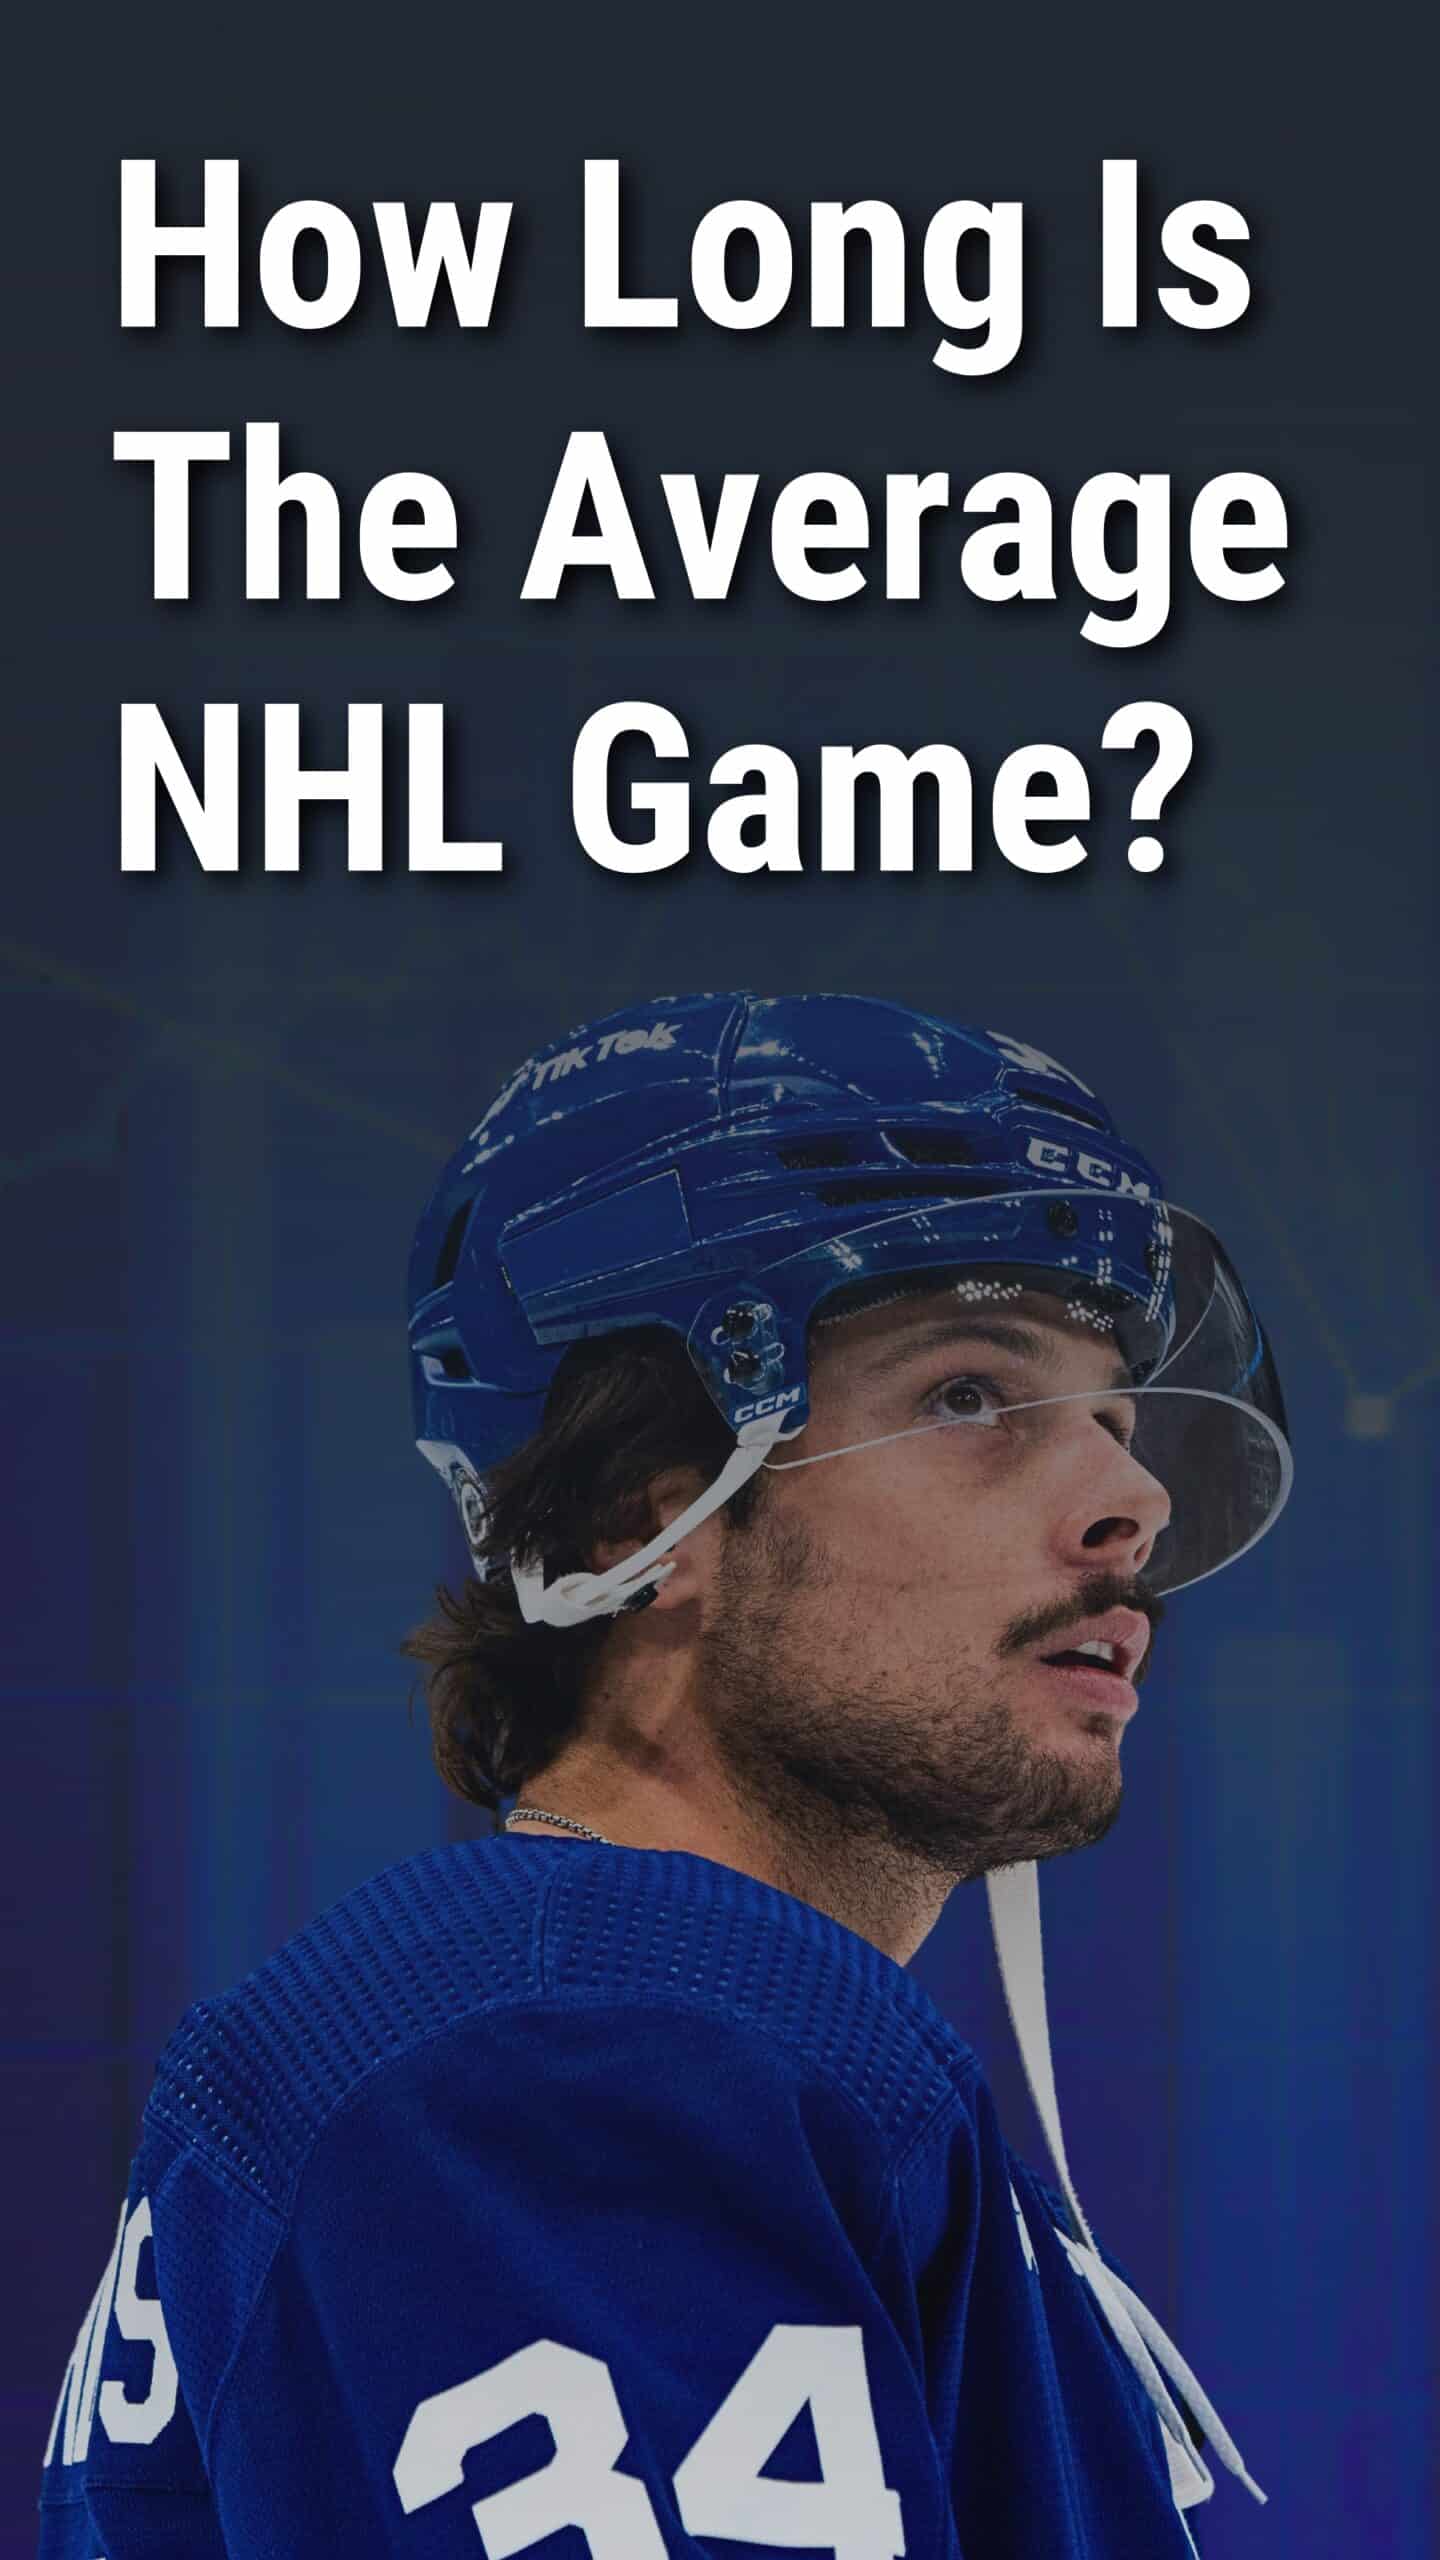 How Long Is The Average NHL Game?